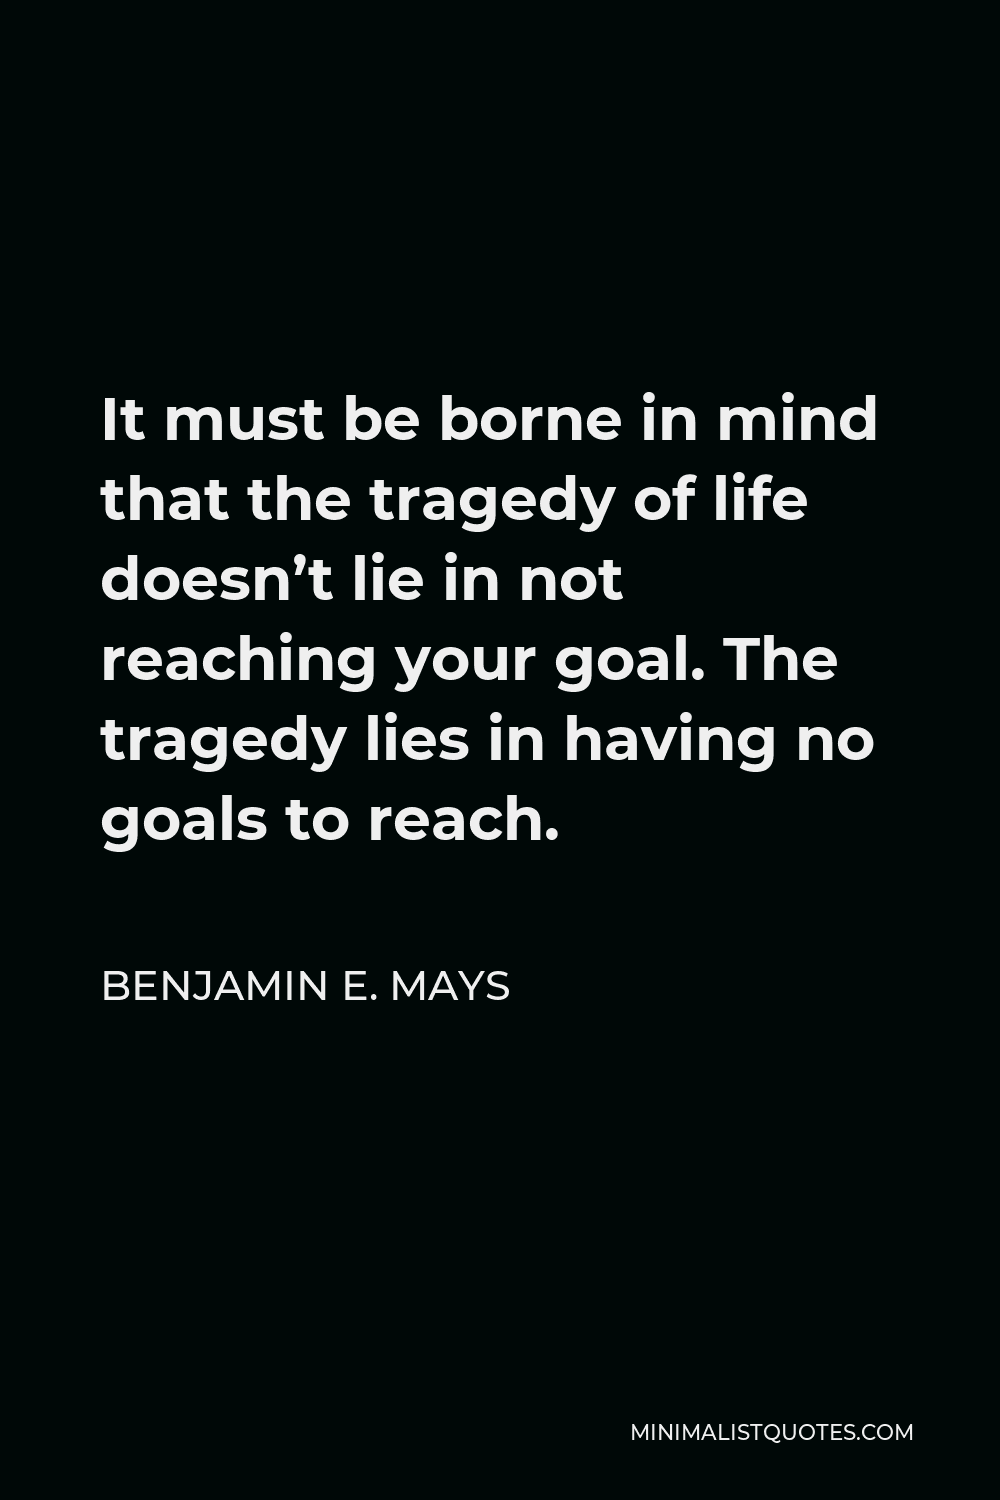 Benjamin E. Mays Quote - It must be borne in mind that the tragedy of life doesn’t lie in not reaching your goal. The tragedy lies in having no goals to reach.